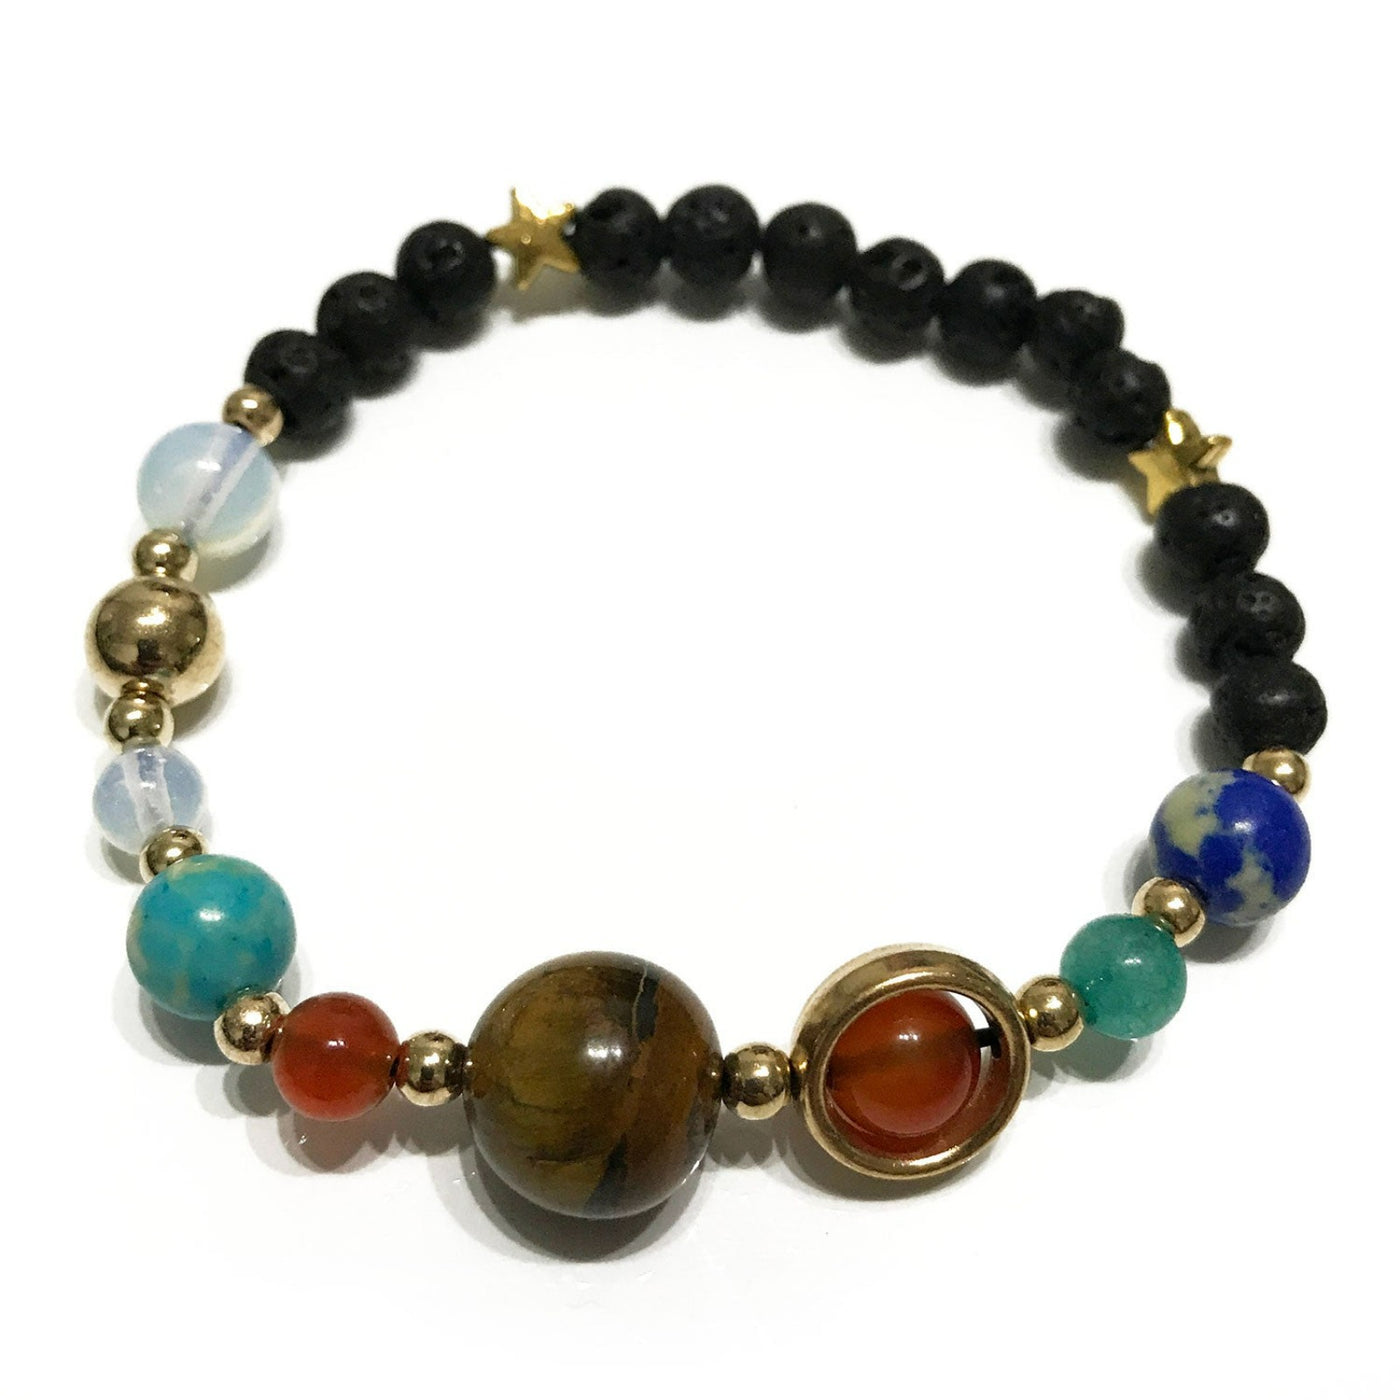 Gold Solar System Lava Stone Women's Bracelet With Beads And Gemstones.